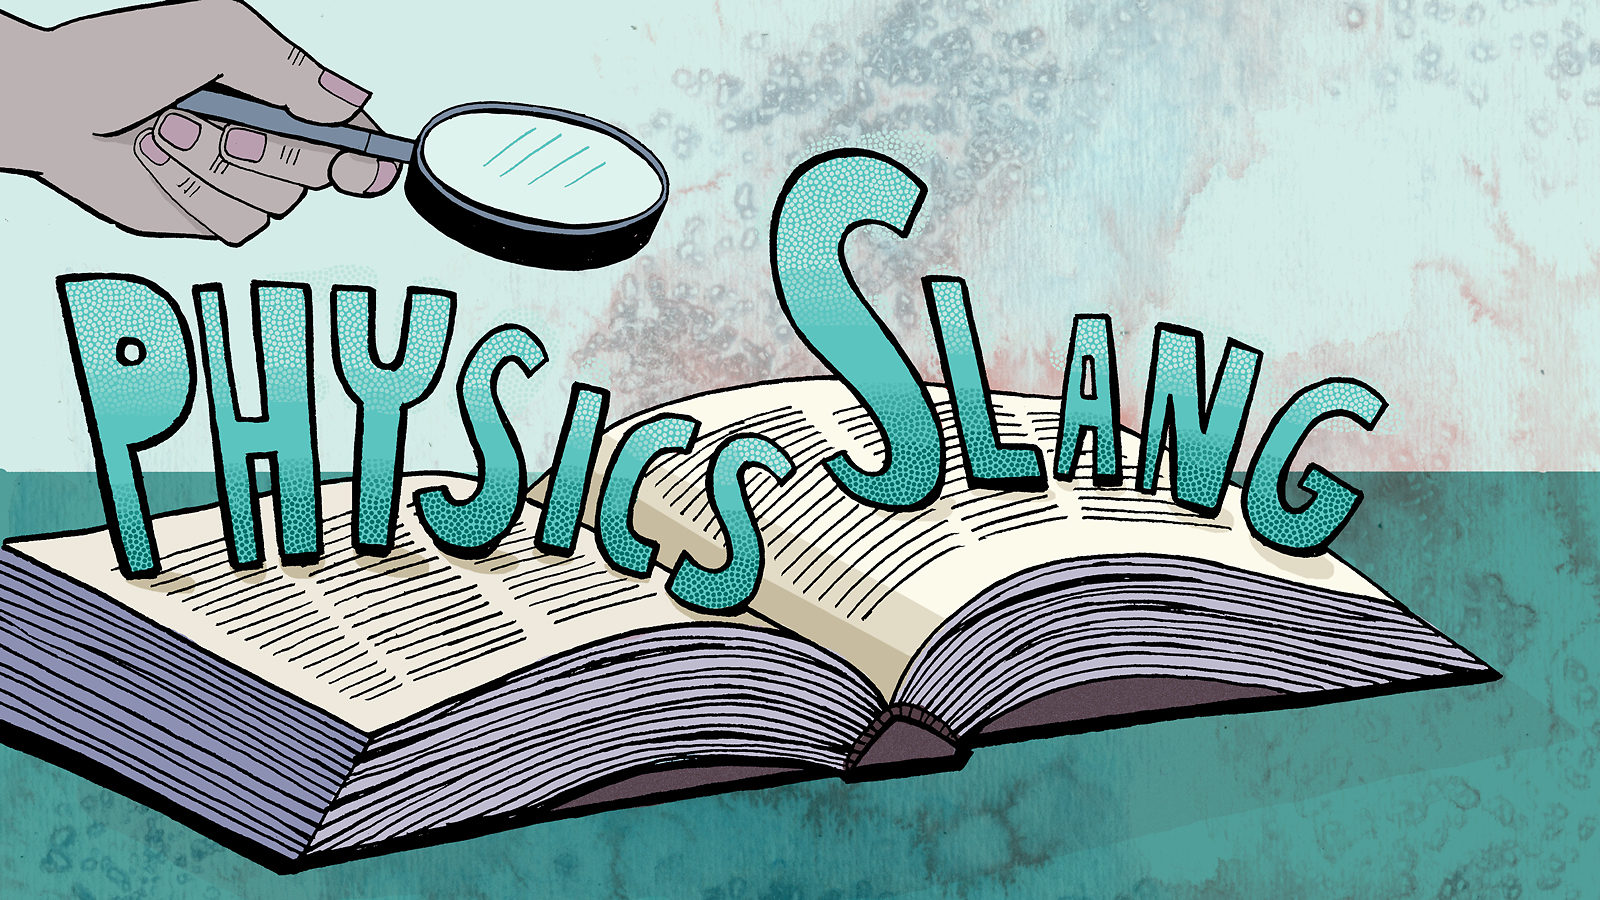 Green graphic of persons hand with microscope over book with words "physics slang" popping out